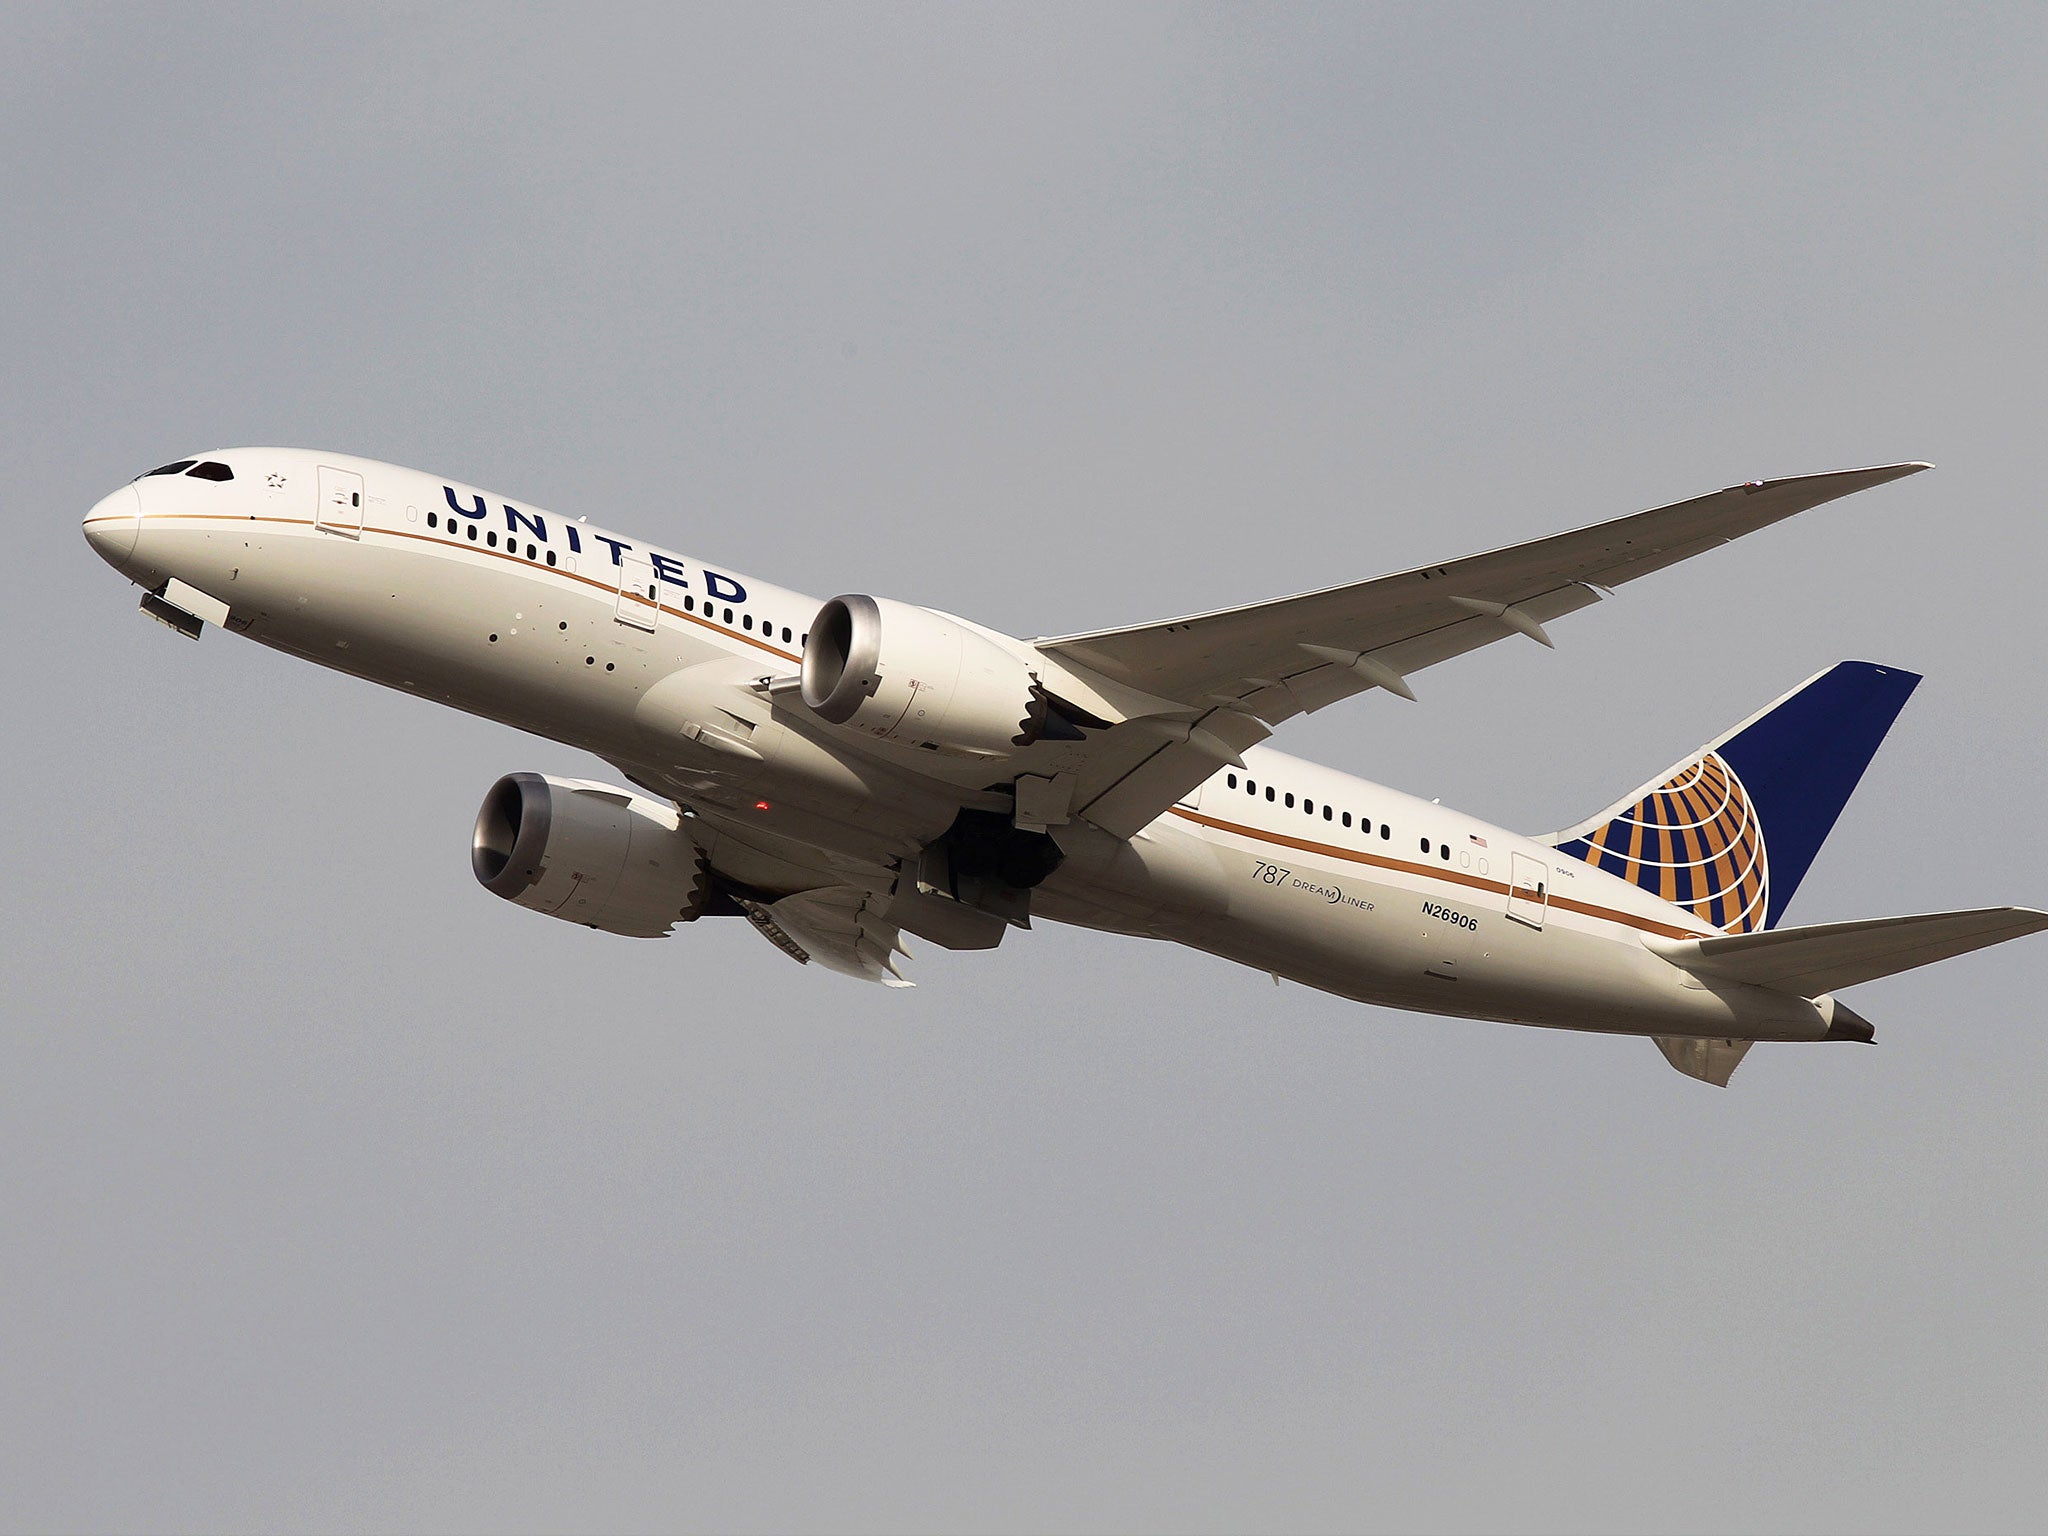 United Airlines is attempting to address overbooking issues